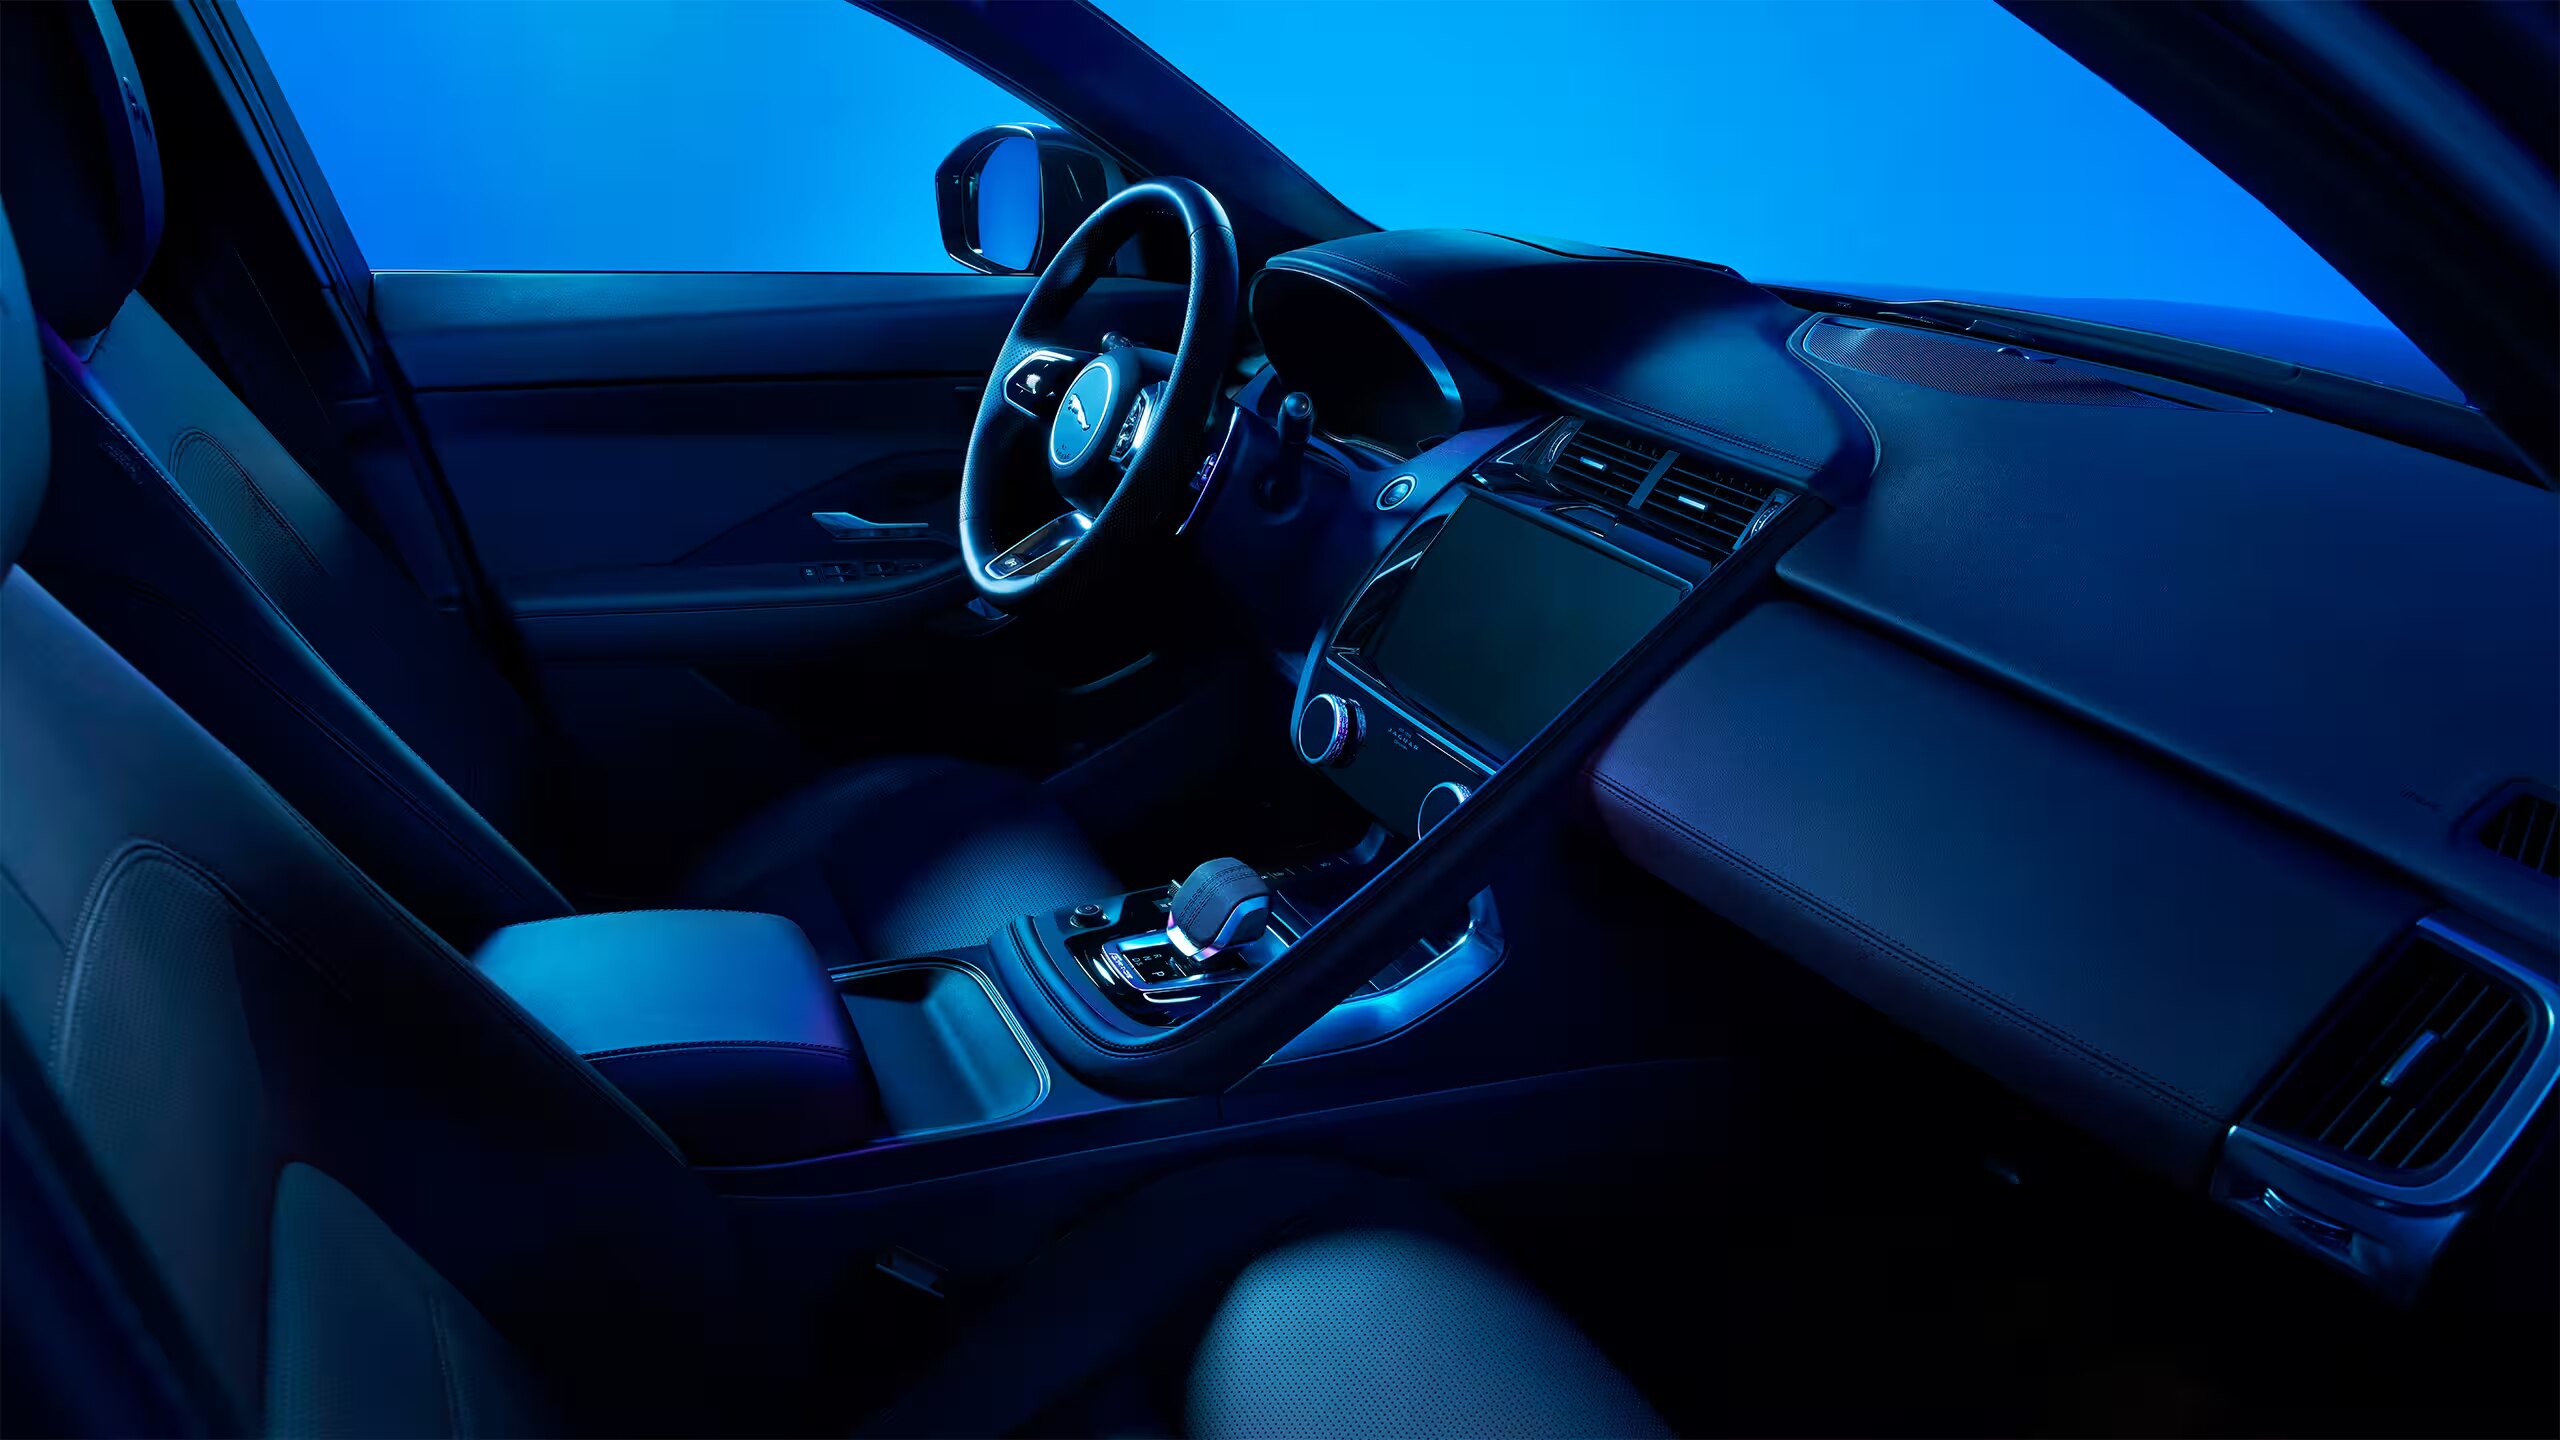 The Interior, Steering, And Central Console Of A Jaguar E-Pace (Credits Jaguar)